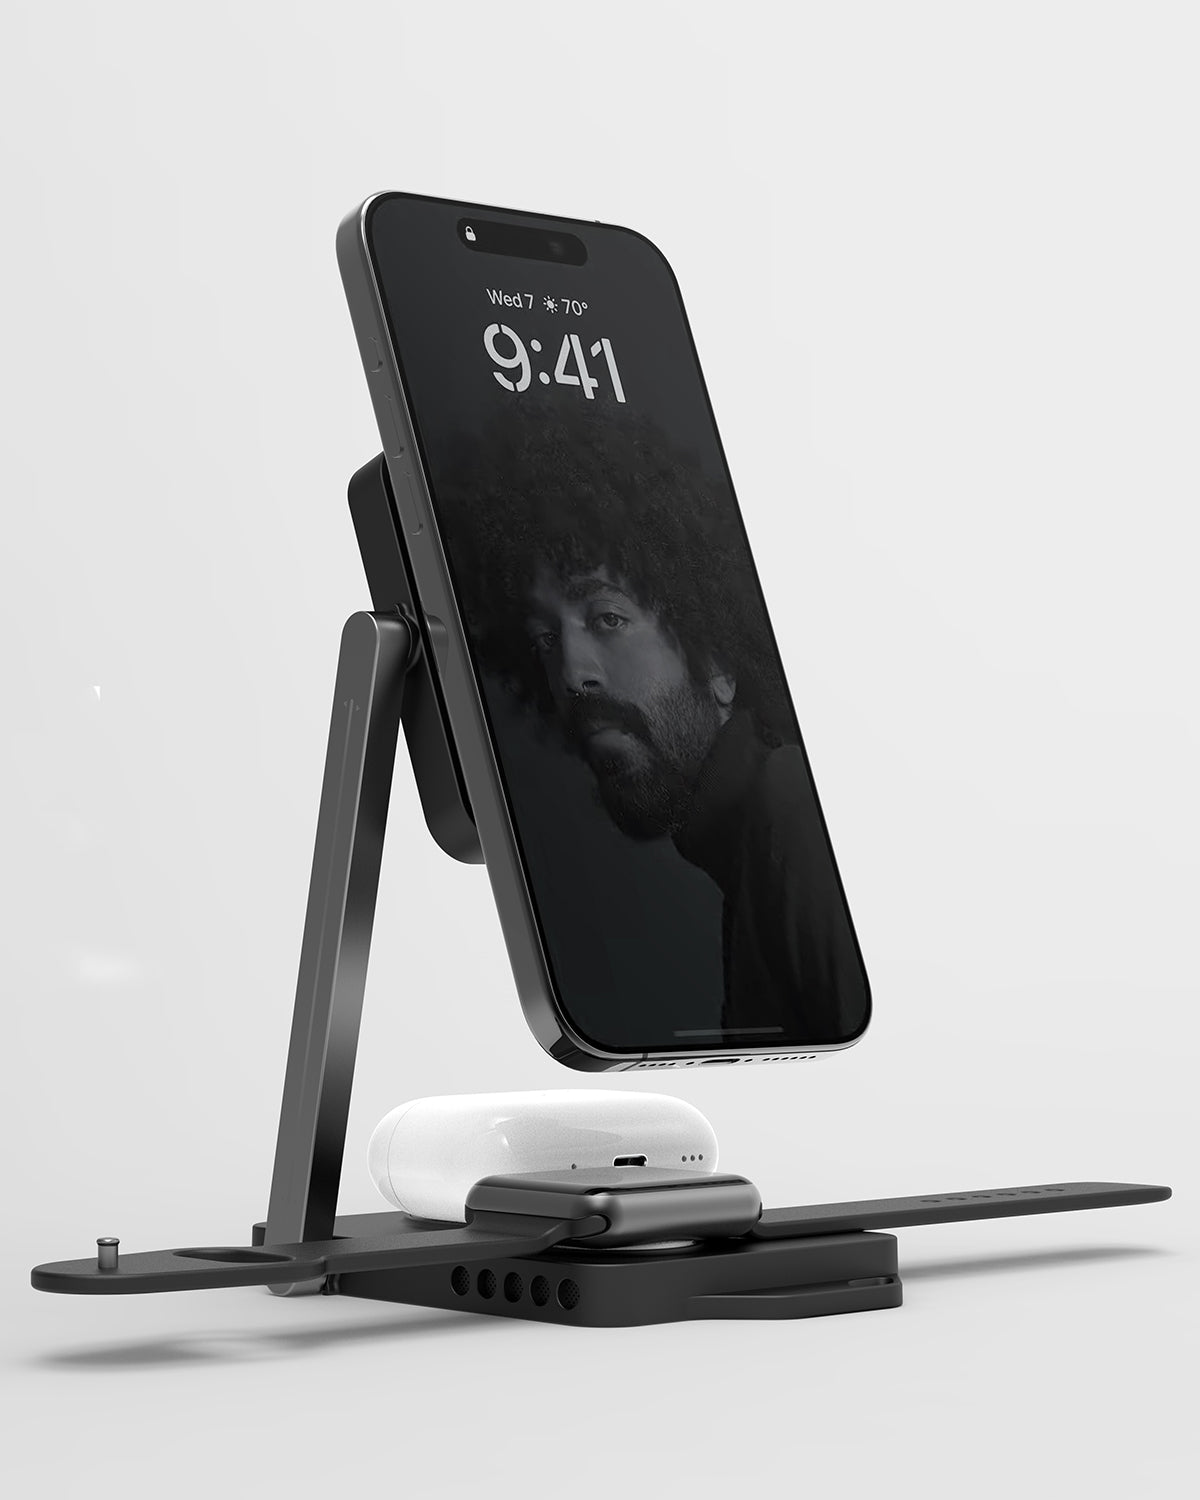 Foldable Stand for MagSafe Charger, Adjustable IPhone 12 Wireless Charger  Stand